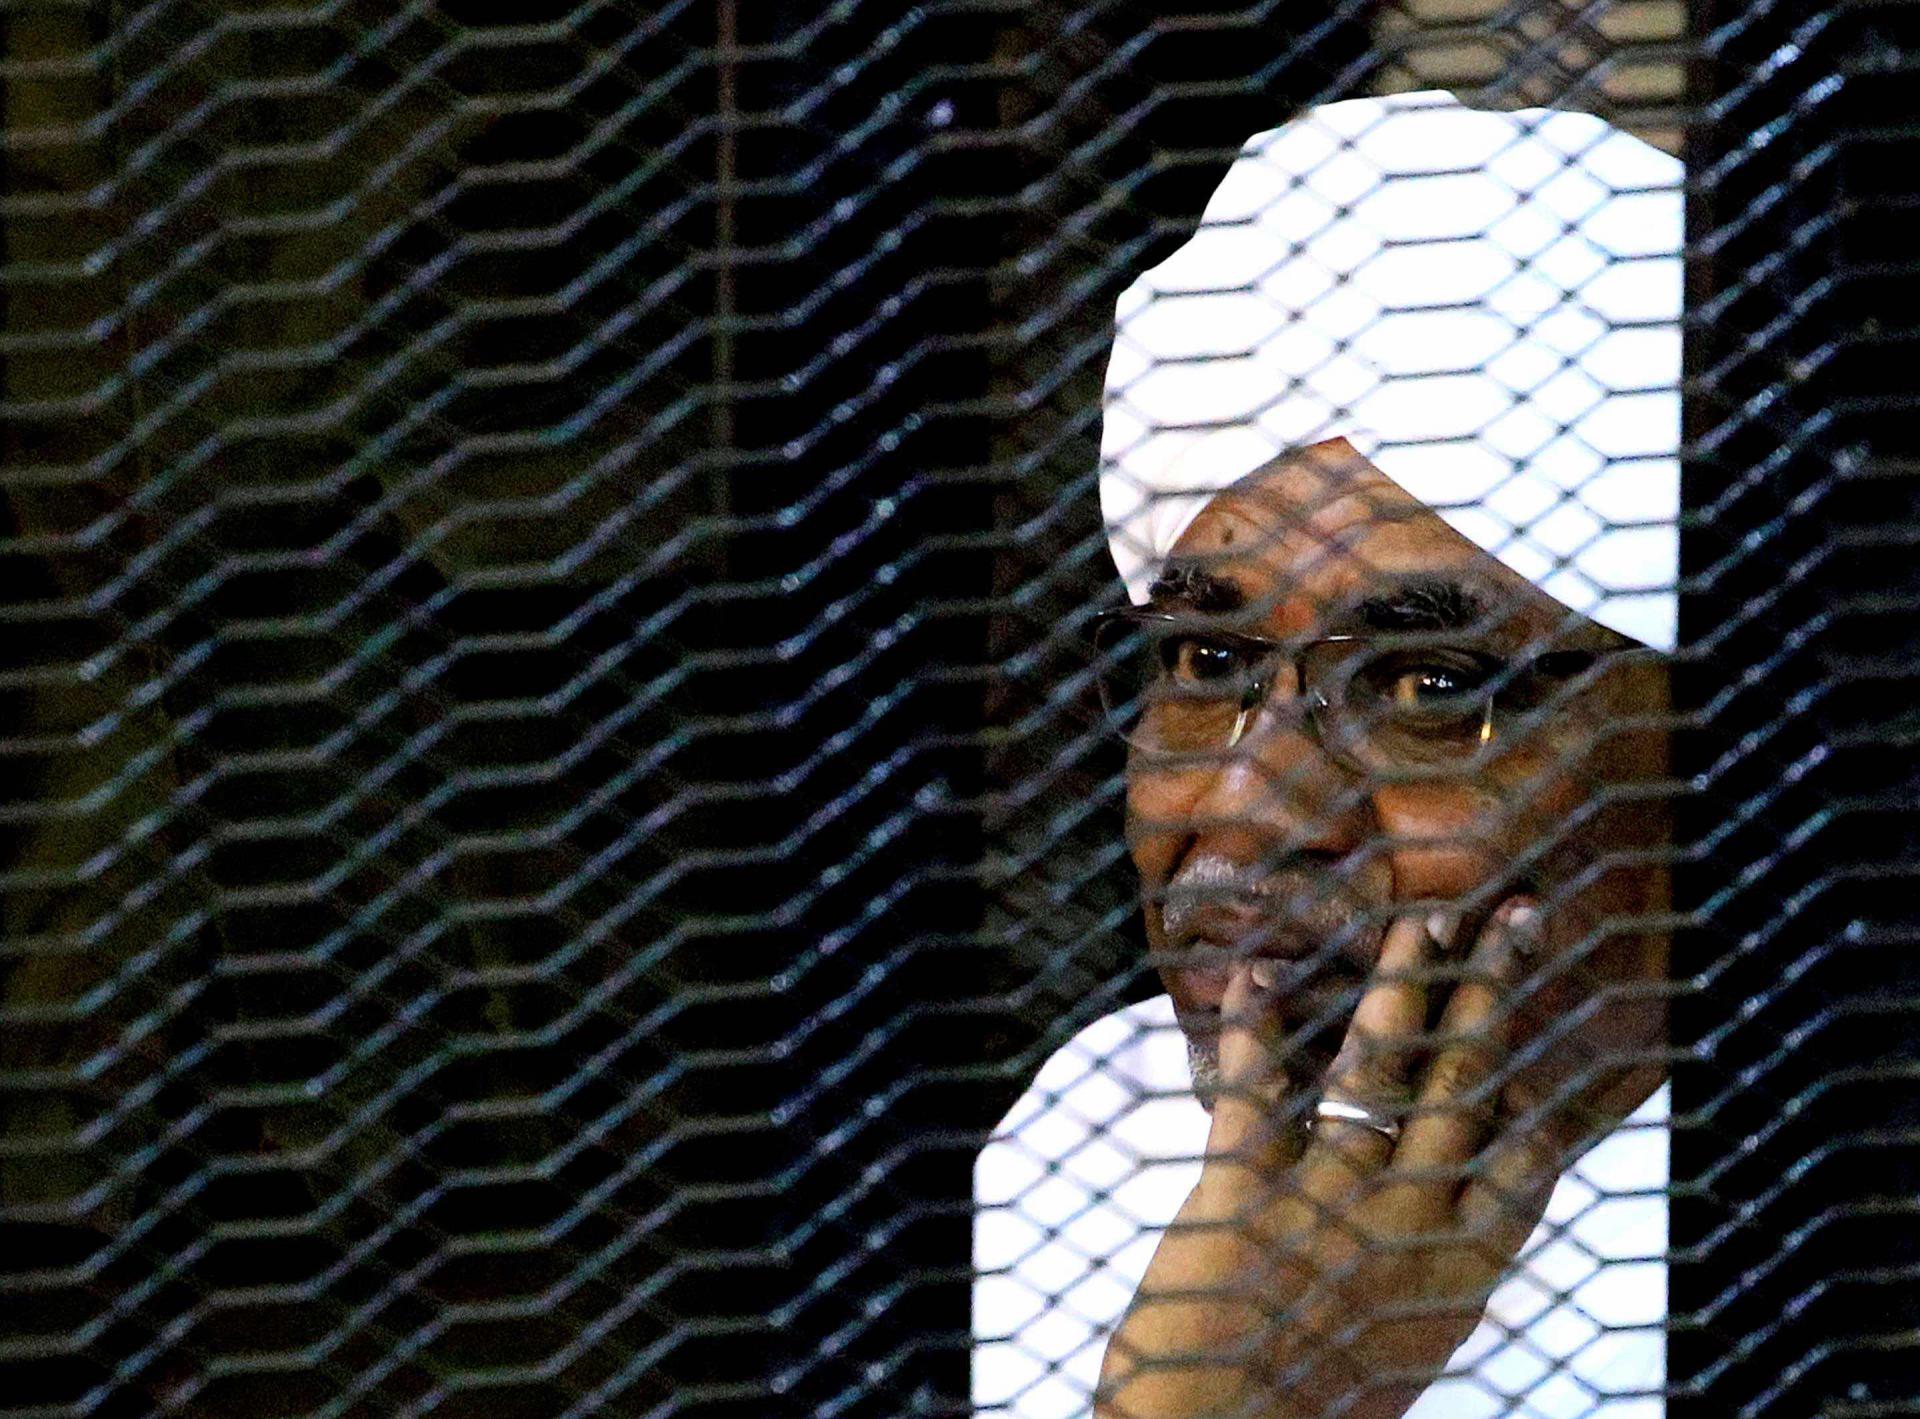 The decision to surrender Bashir to the ICC came after protracted talks between rebel groups, including from Darfur, and Sudan's ruling body